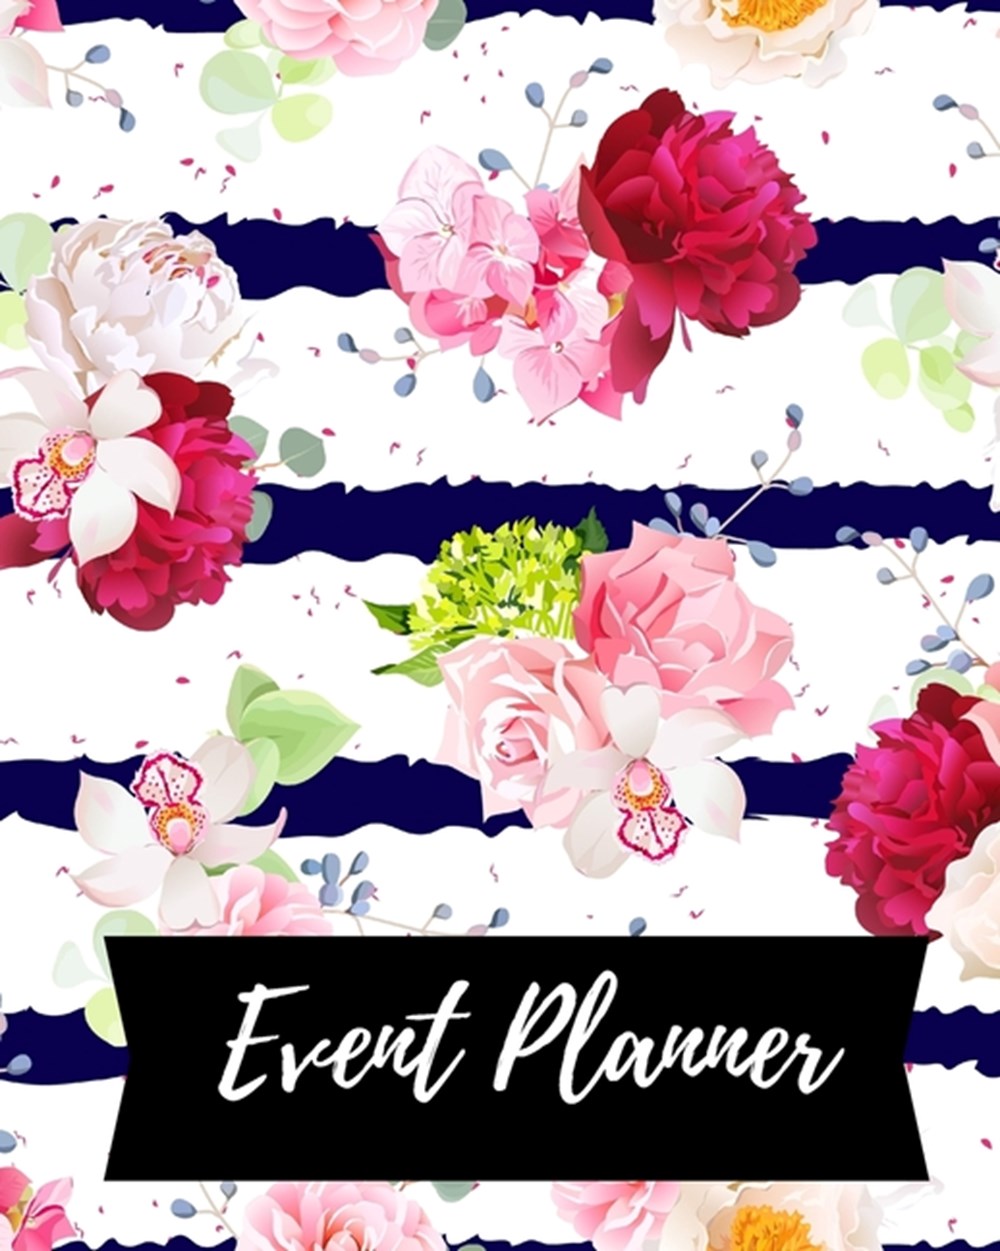 Event Planner Ultimate Guide to Successful Event Management. Dynamic Calendar to Record all your Imp